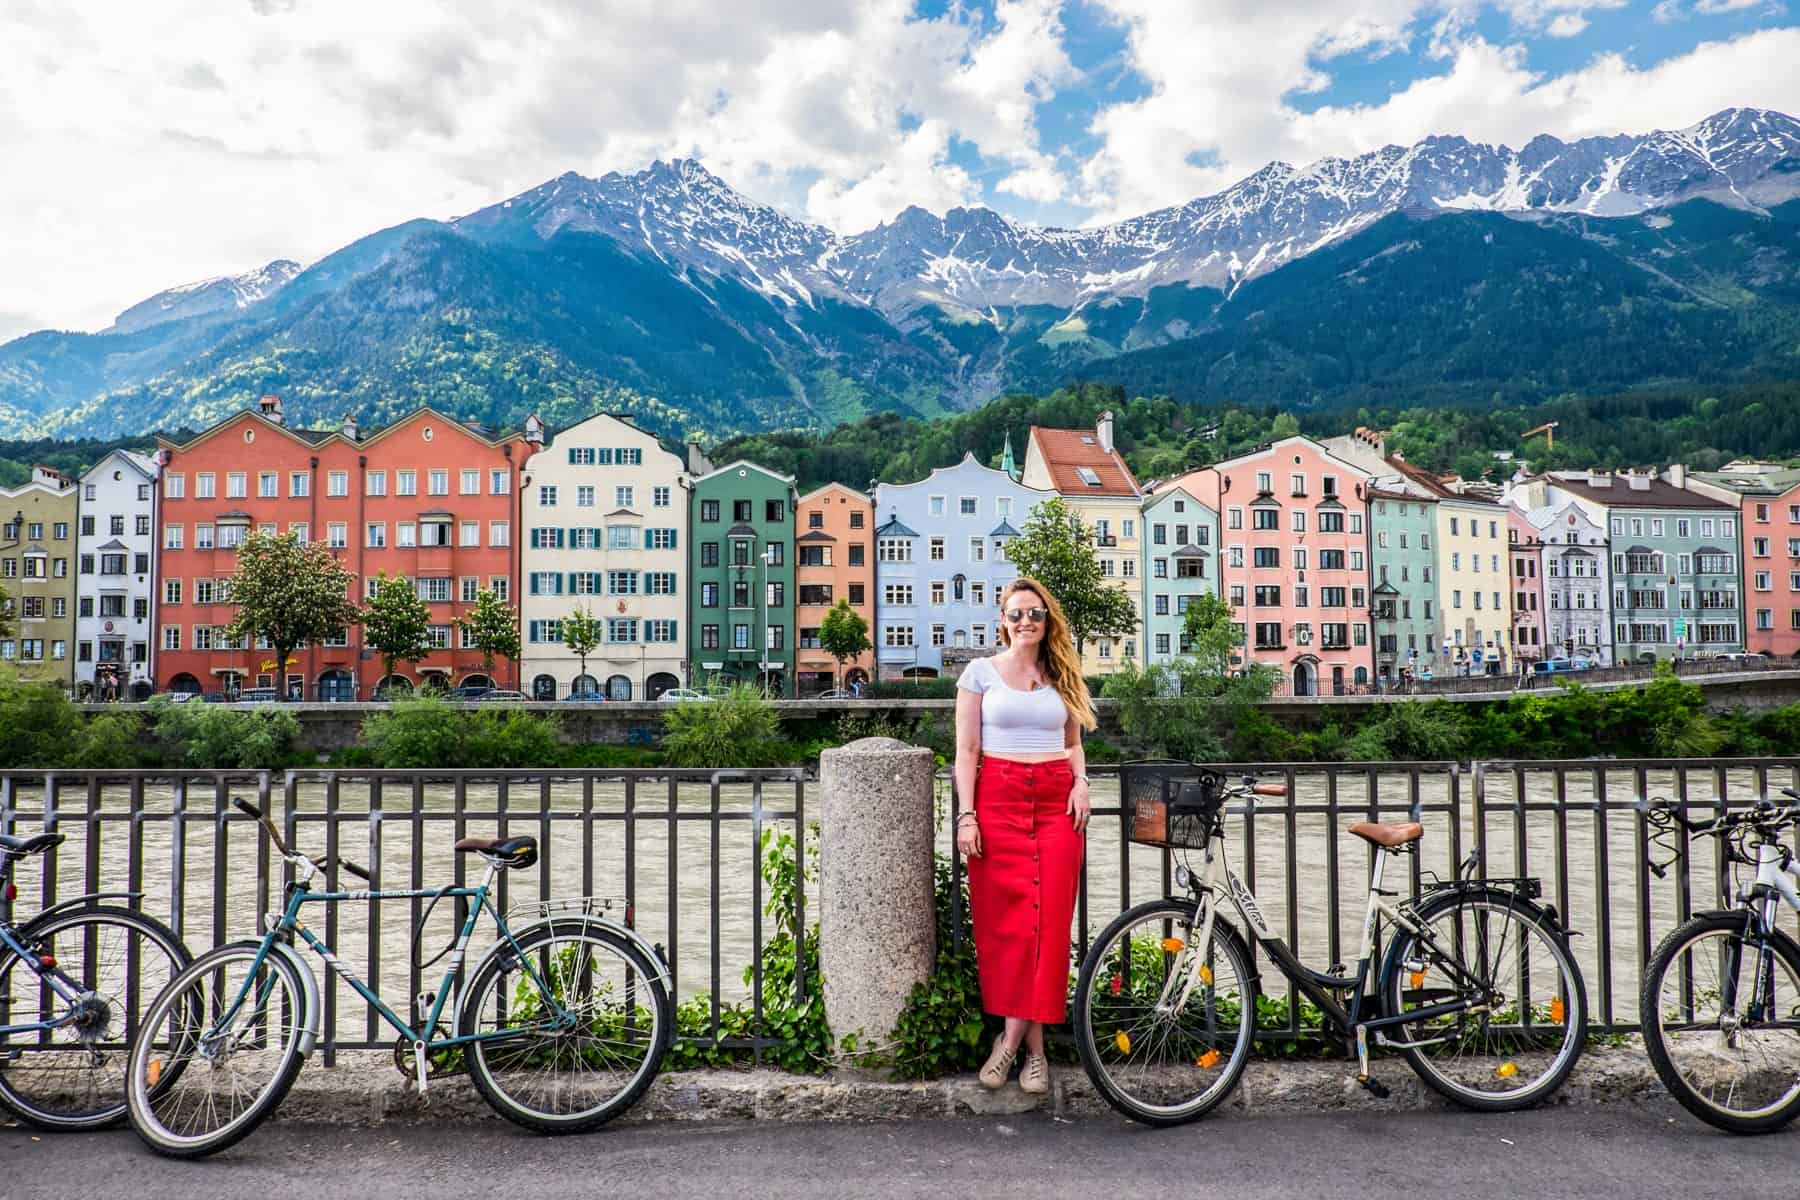 A woman in a red skirt stands in front of an iron railing, with the colourful houses along the Inn River in Innsbruck, Austria in the background